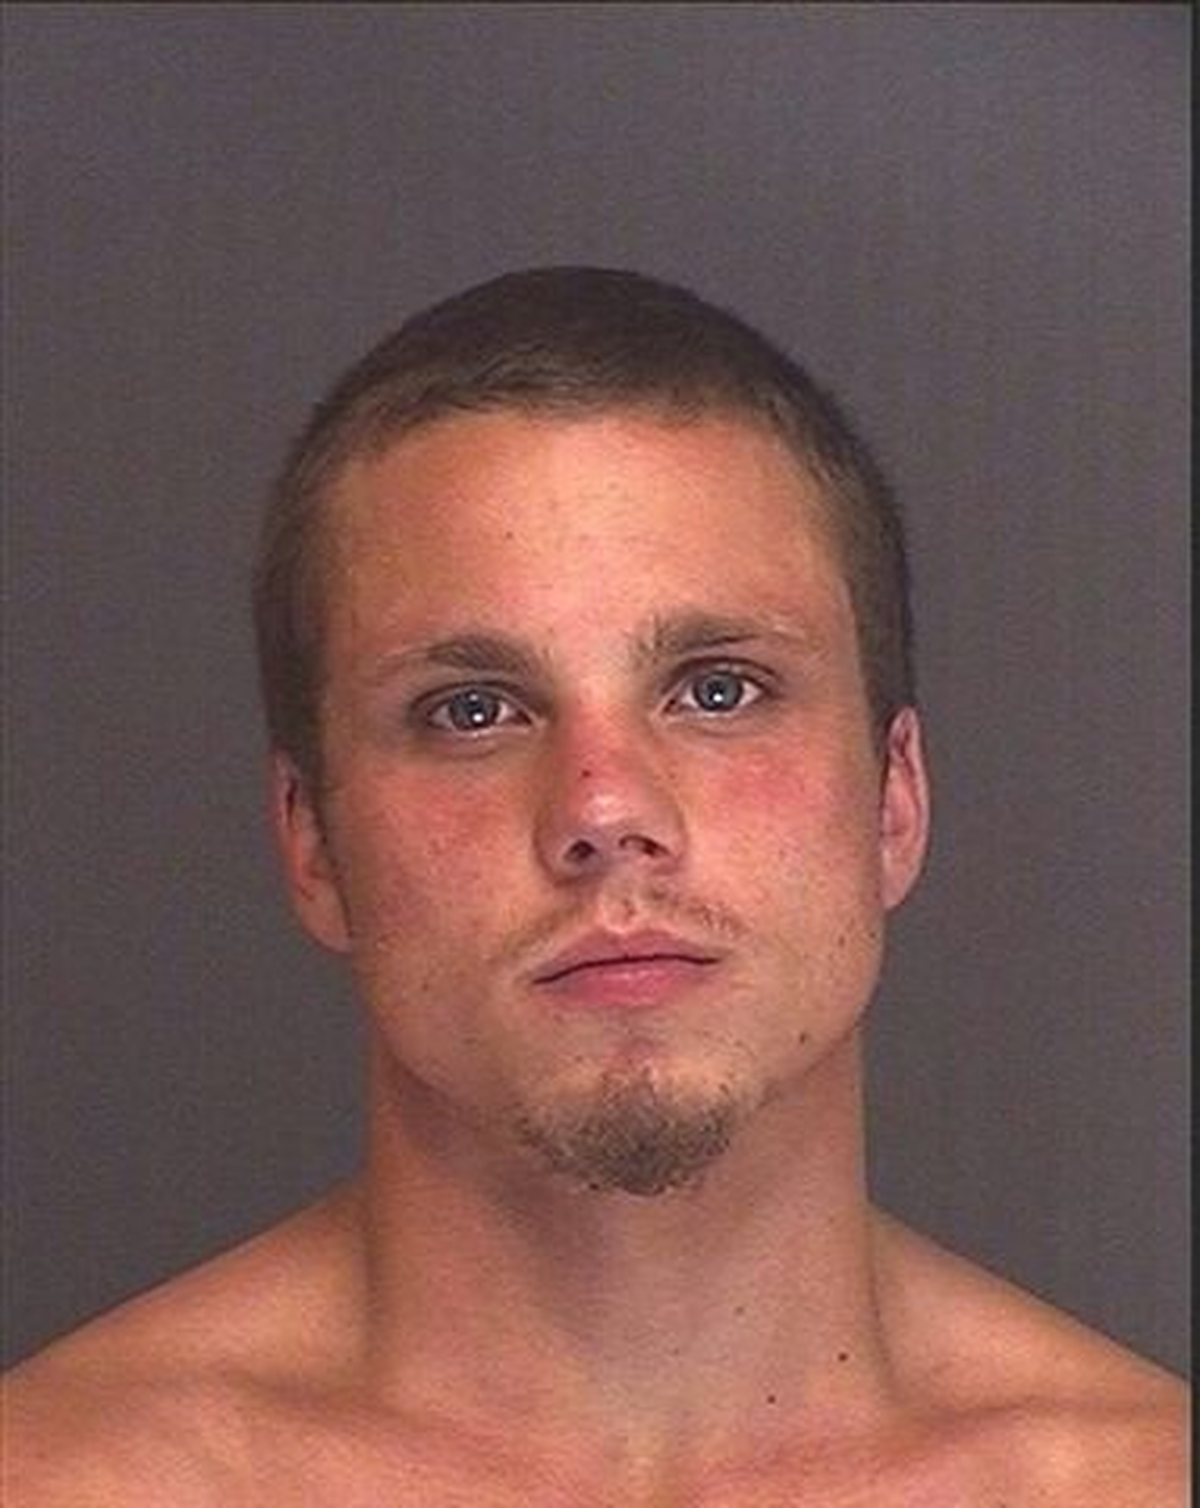 Brandon Graham is a 23-year-old white male wanted for second-degree burglary.  He is 5-foot-4, 160 pounds, and has brown hair and blue eyes.  Graham’s last address given was in the 1000 block of E. Everett in Spokane.  His 11-year local criminal history includes a conviction for taking motor vehicle without owner’s permission.   (Crime Stoppers)